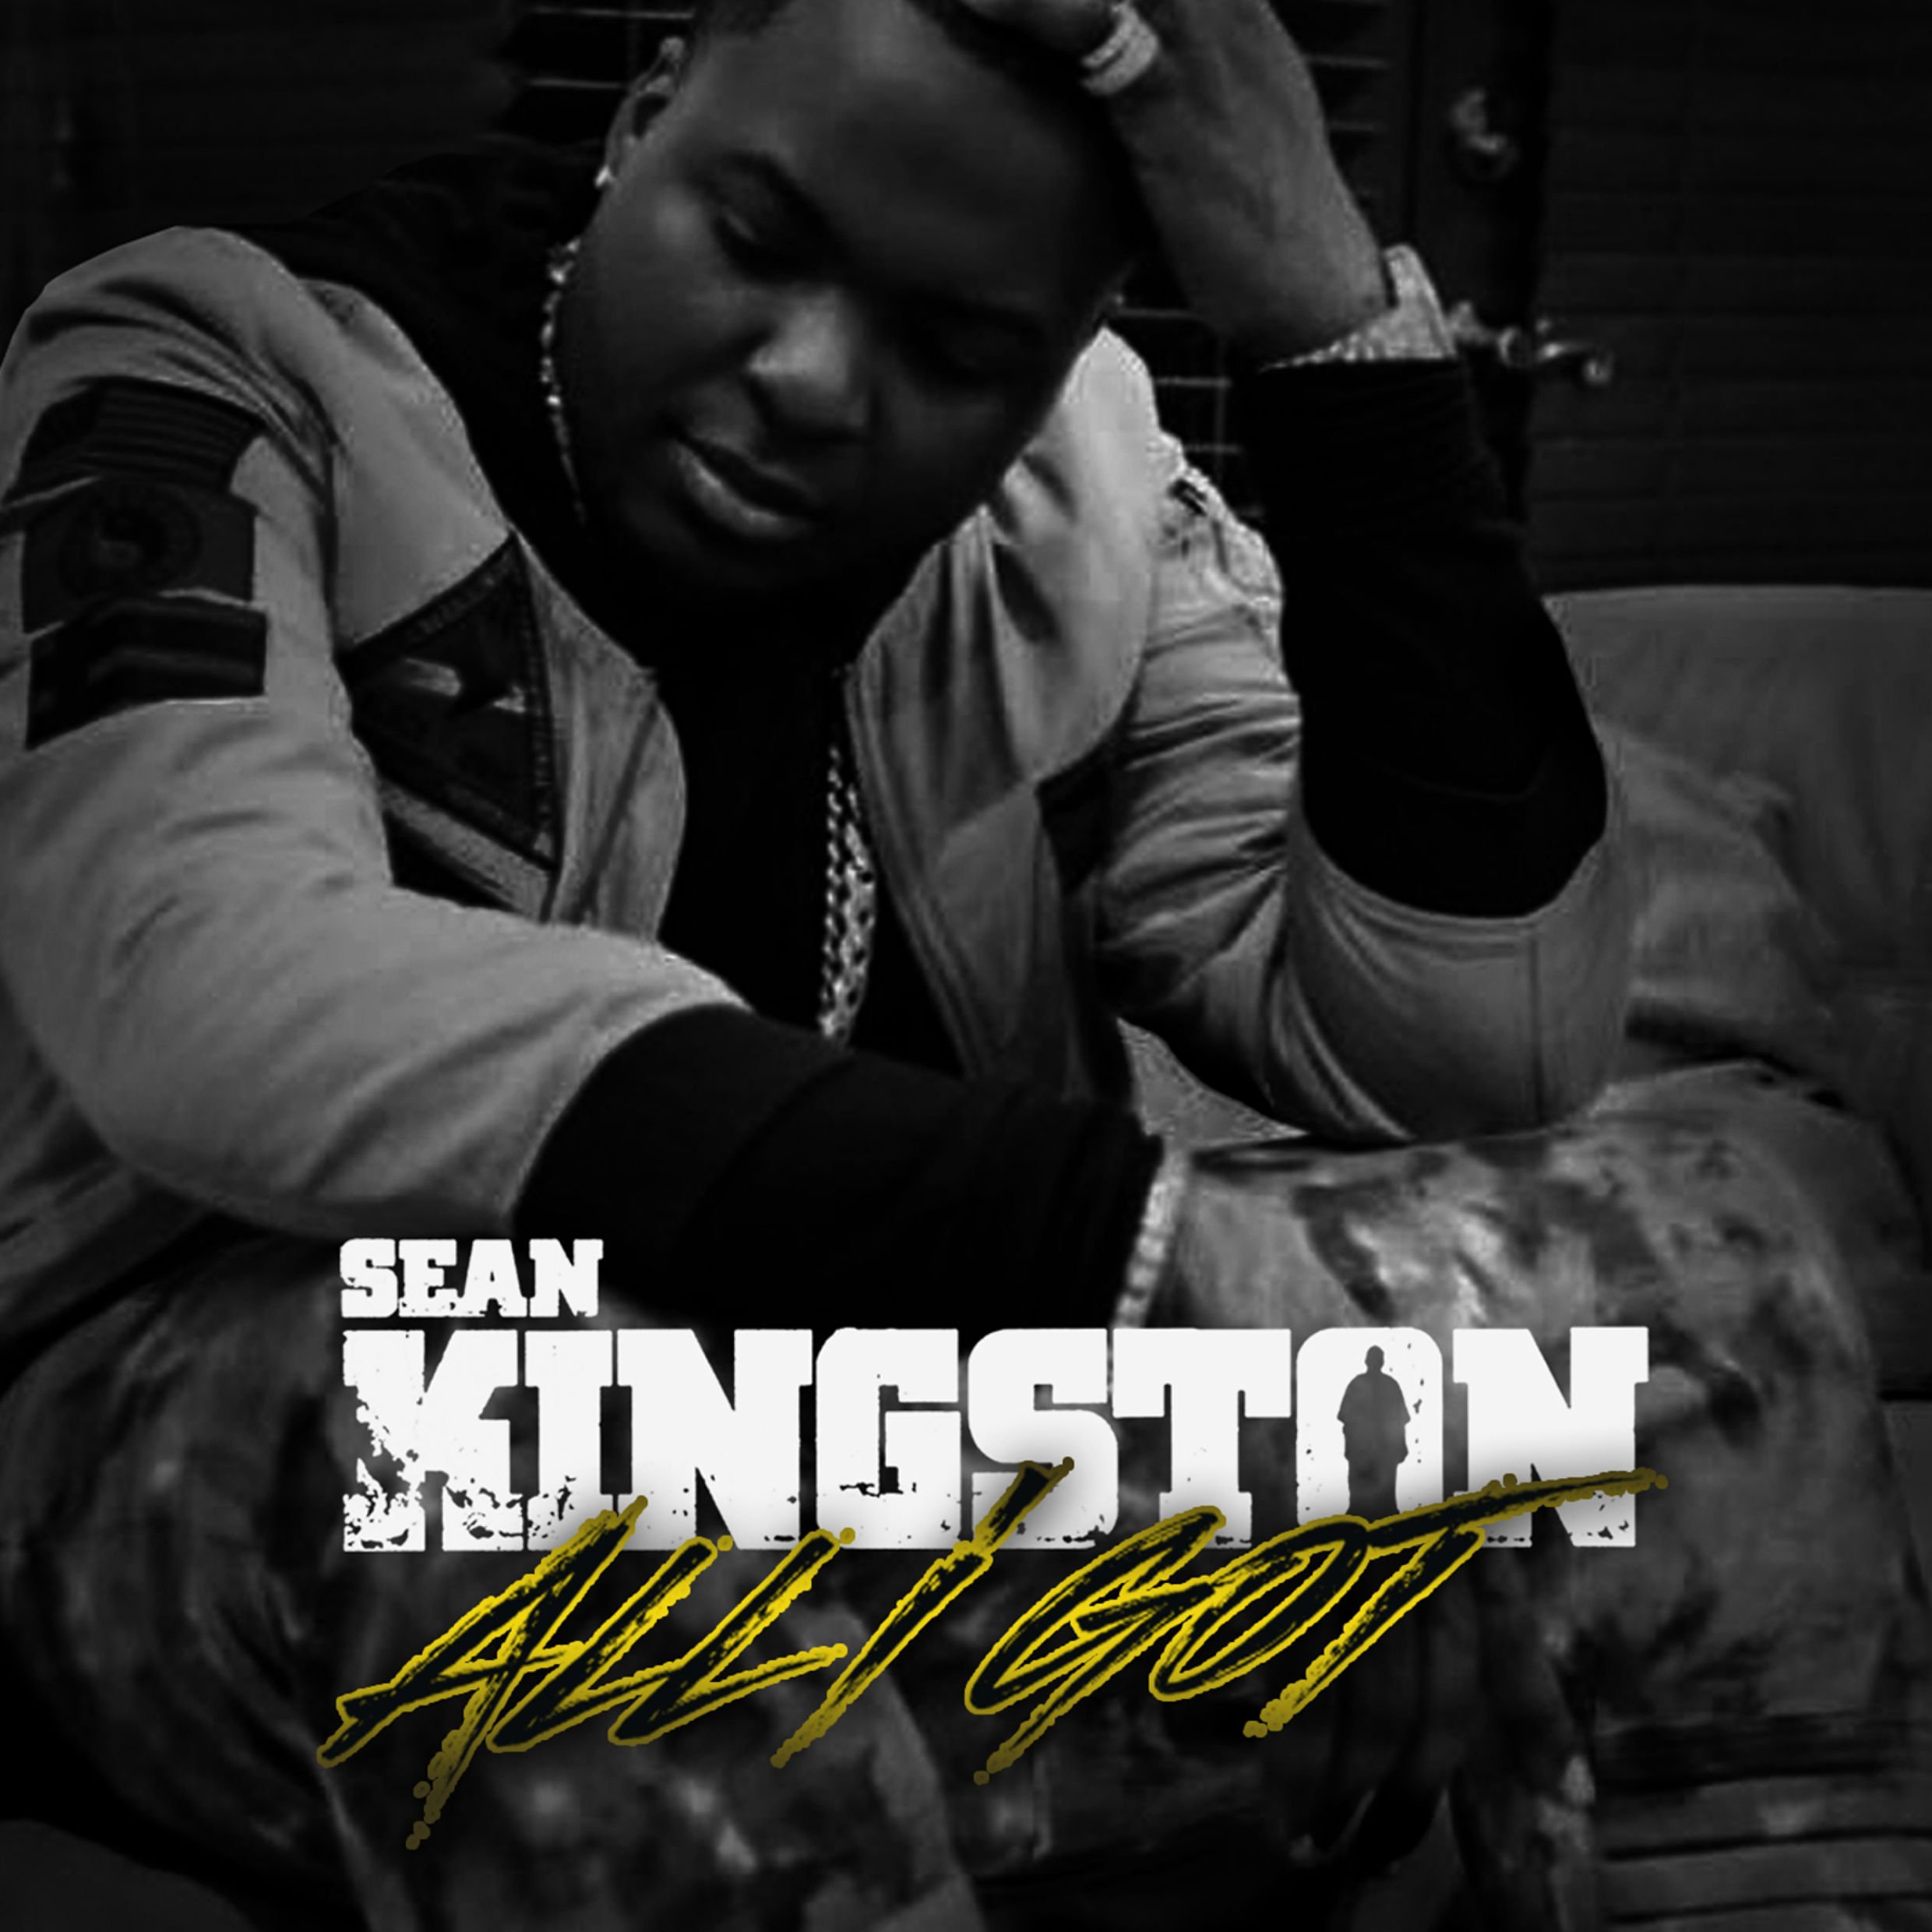 Sean kingston discography torrent fire with fire torrent